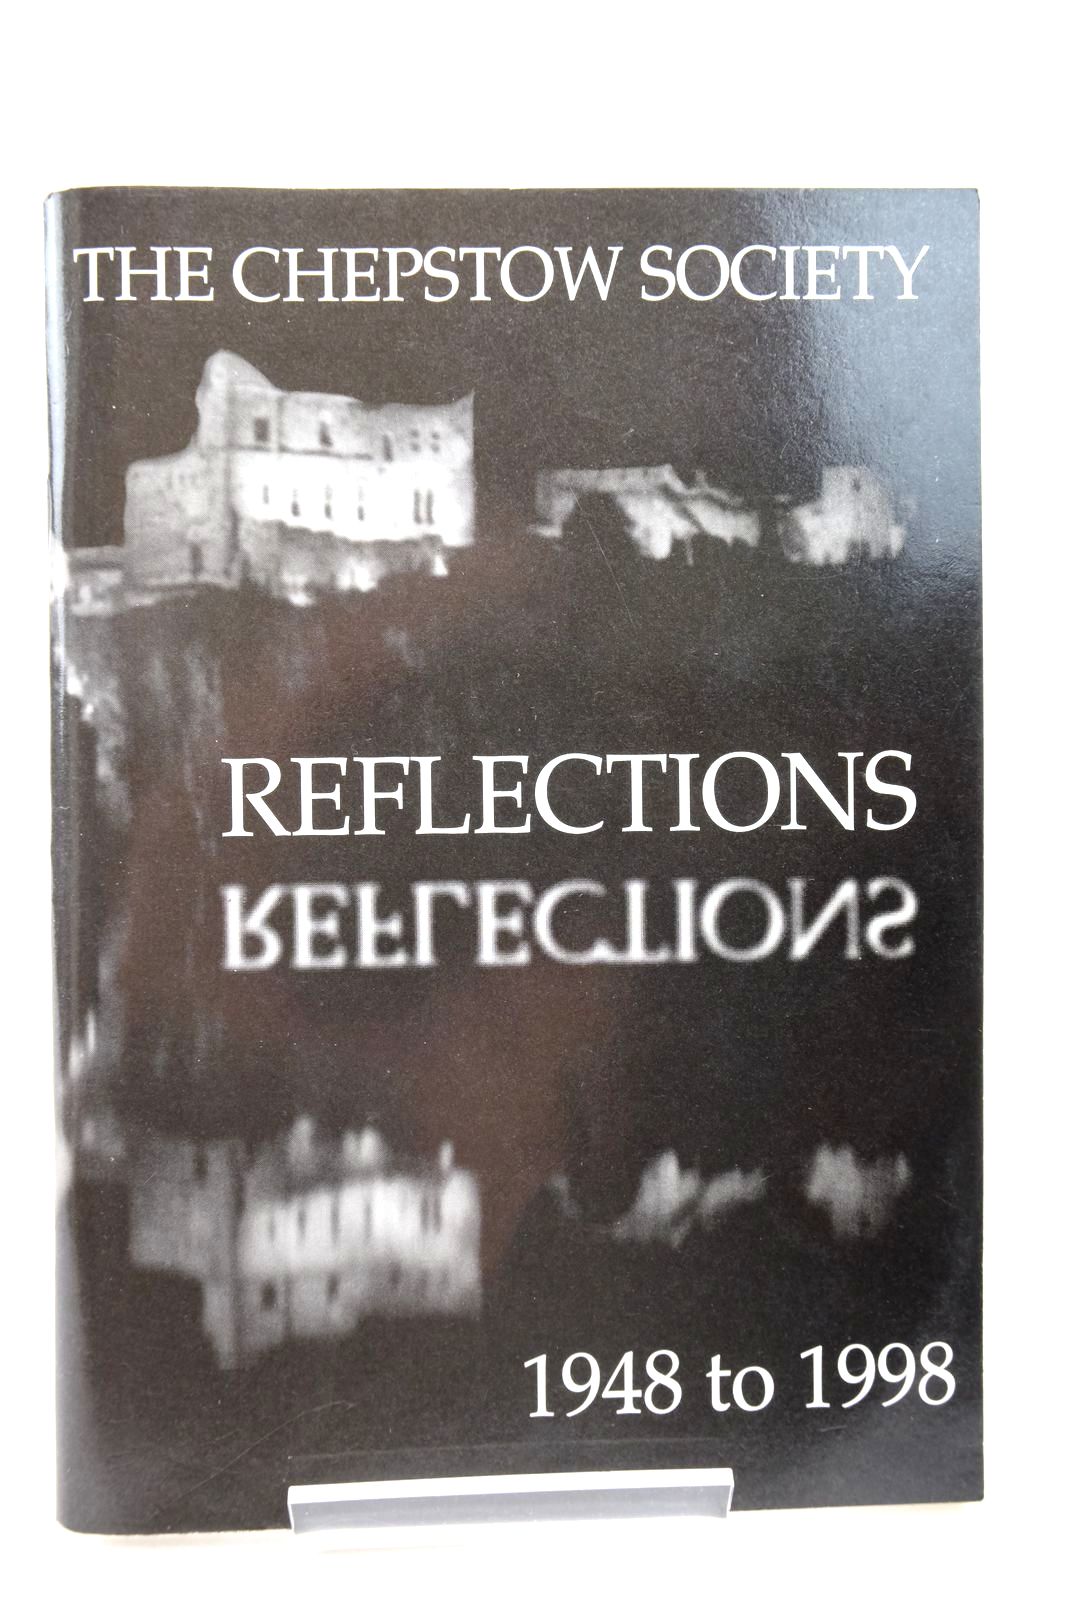 Photo of REFLECTIONS written by Evans, Trevor et al, published by The Chepstow Society (STOCK CODE: 2140446)  for sale by Stella & Rose's Books